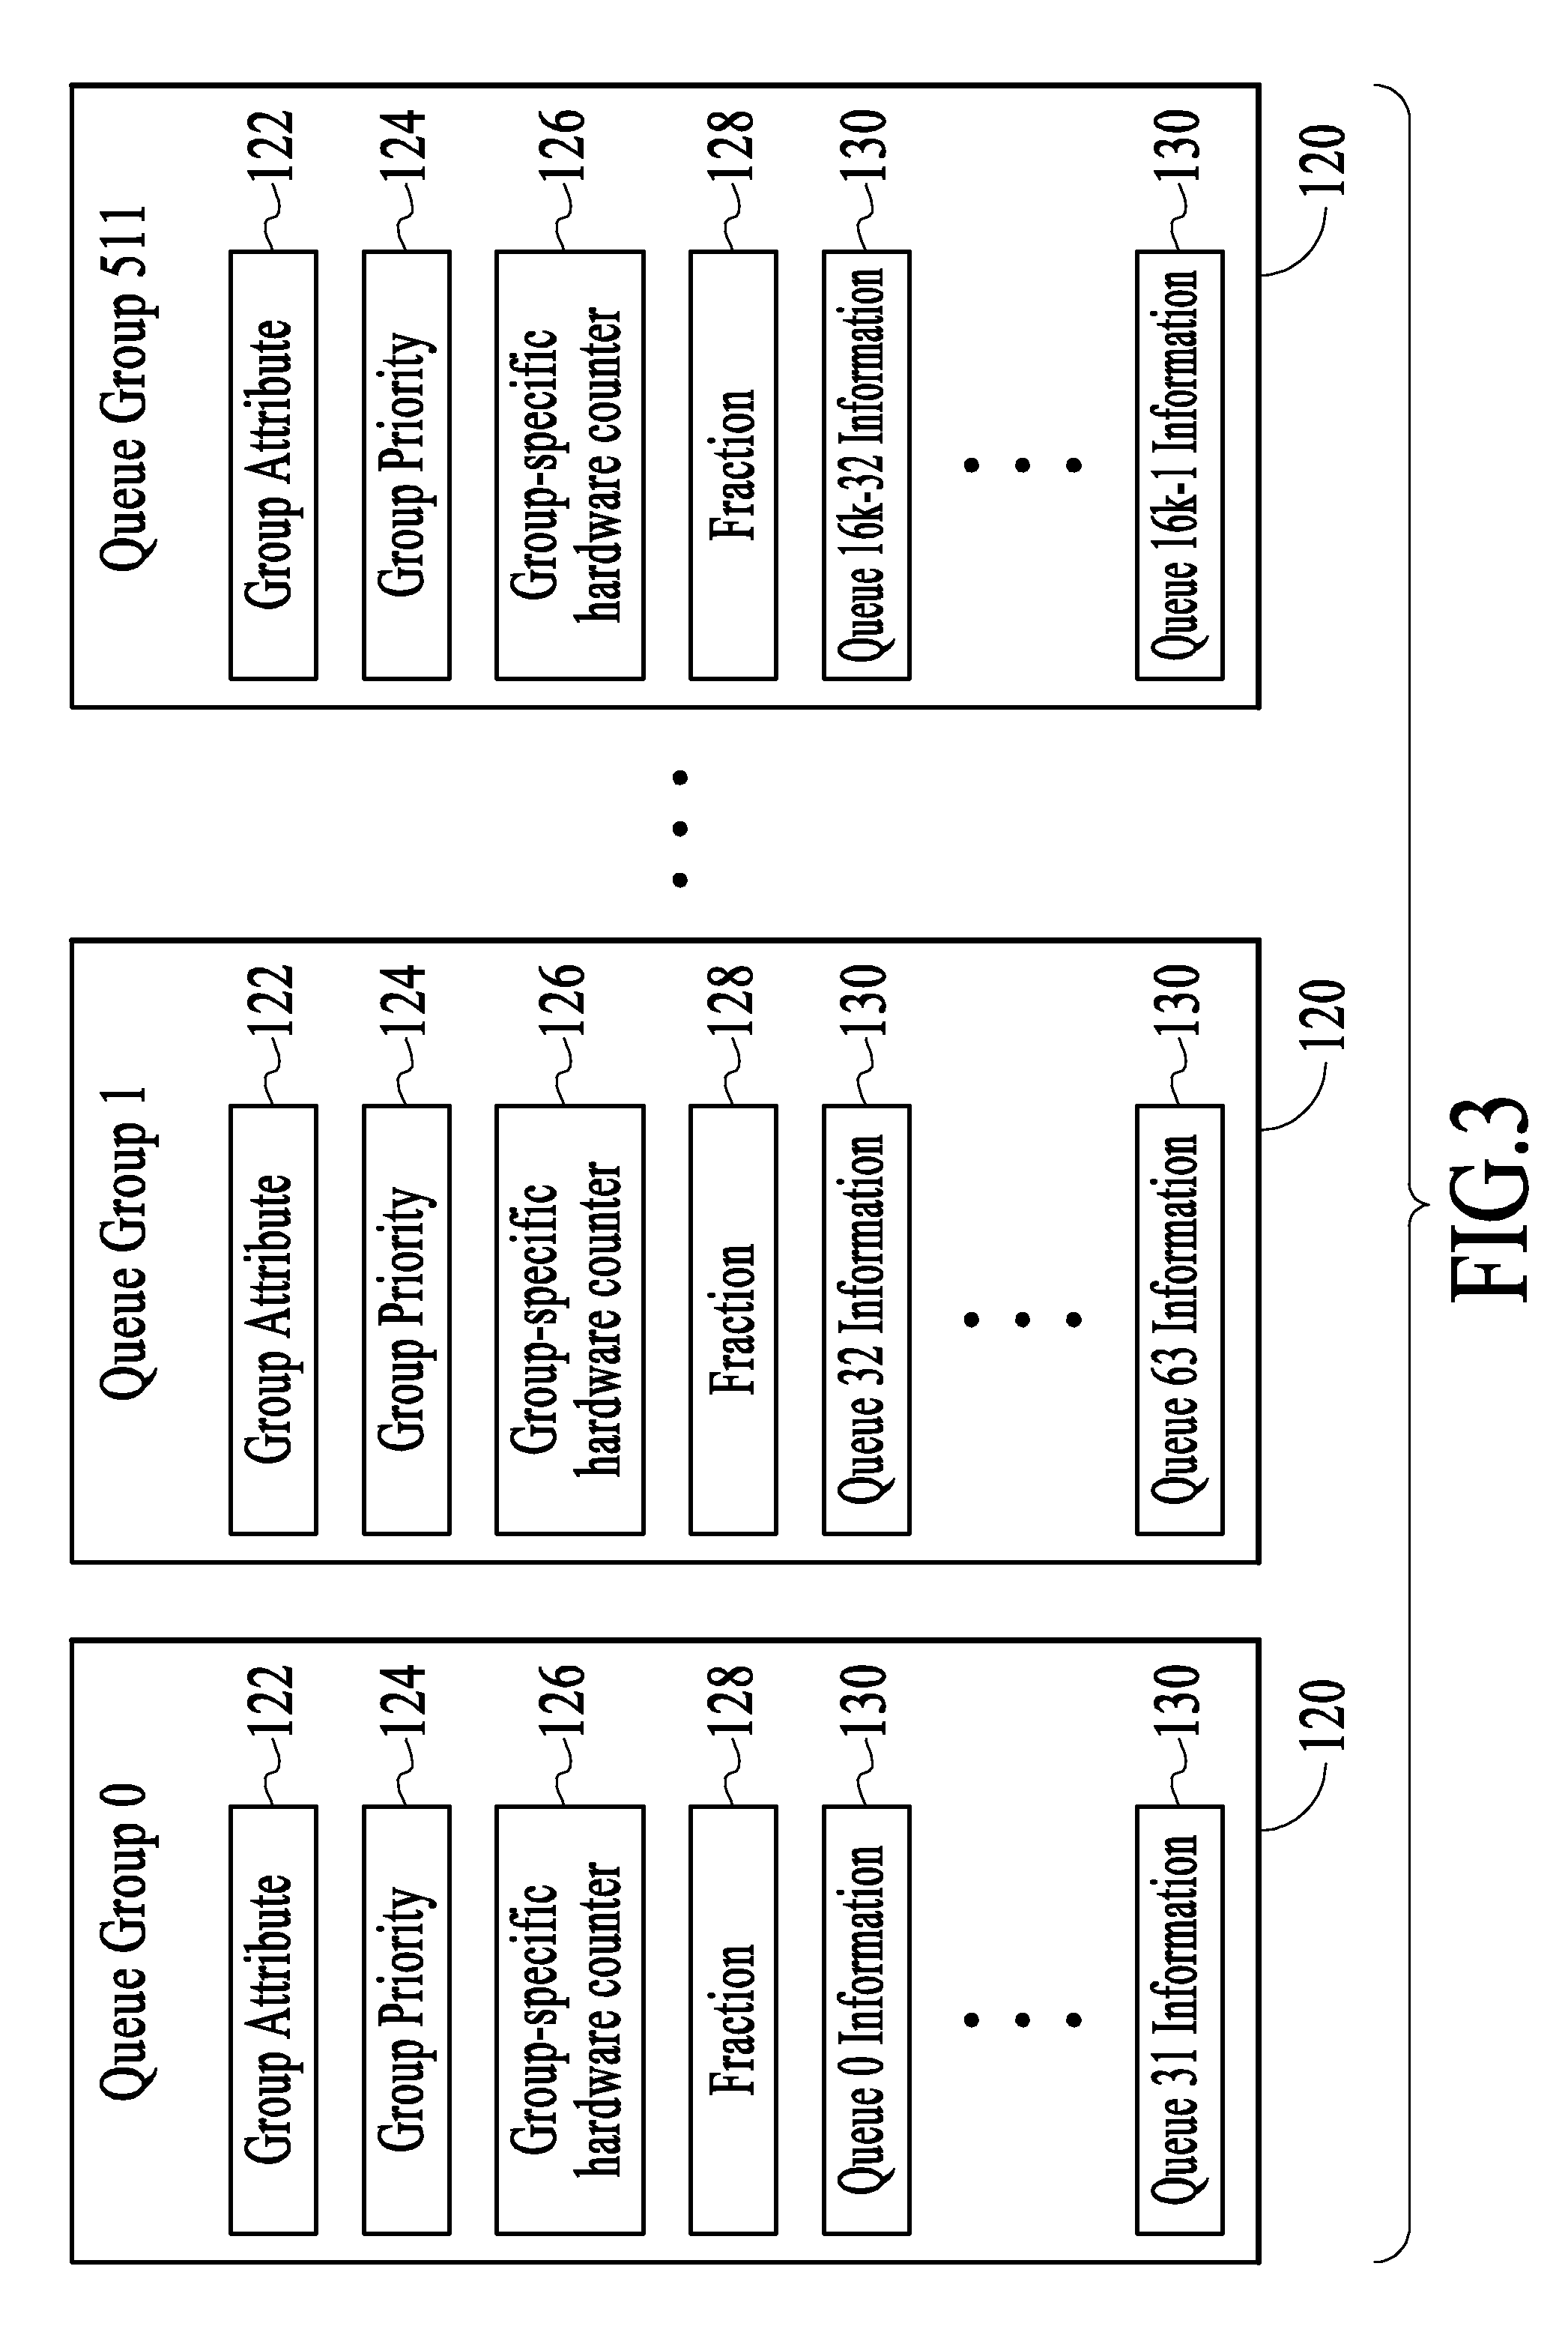 Highly-scalable hardware-based traffic management within a network processor integrated circuit